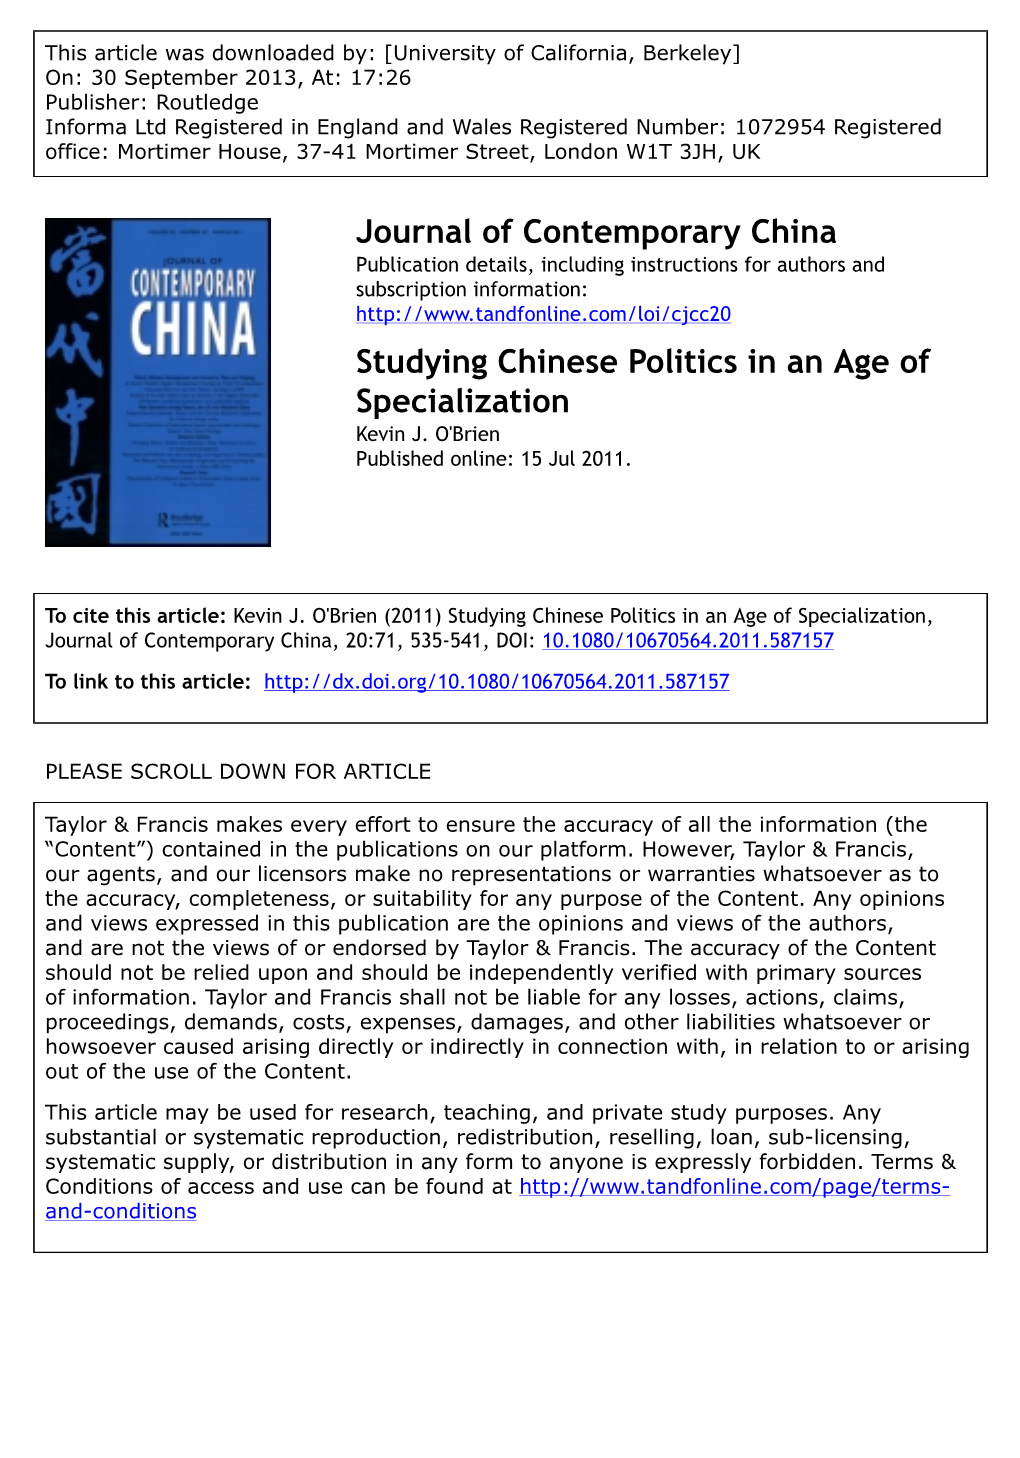 Journal of Contemporary China Studying Chinese Politics in an Age